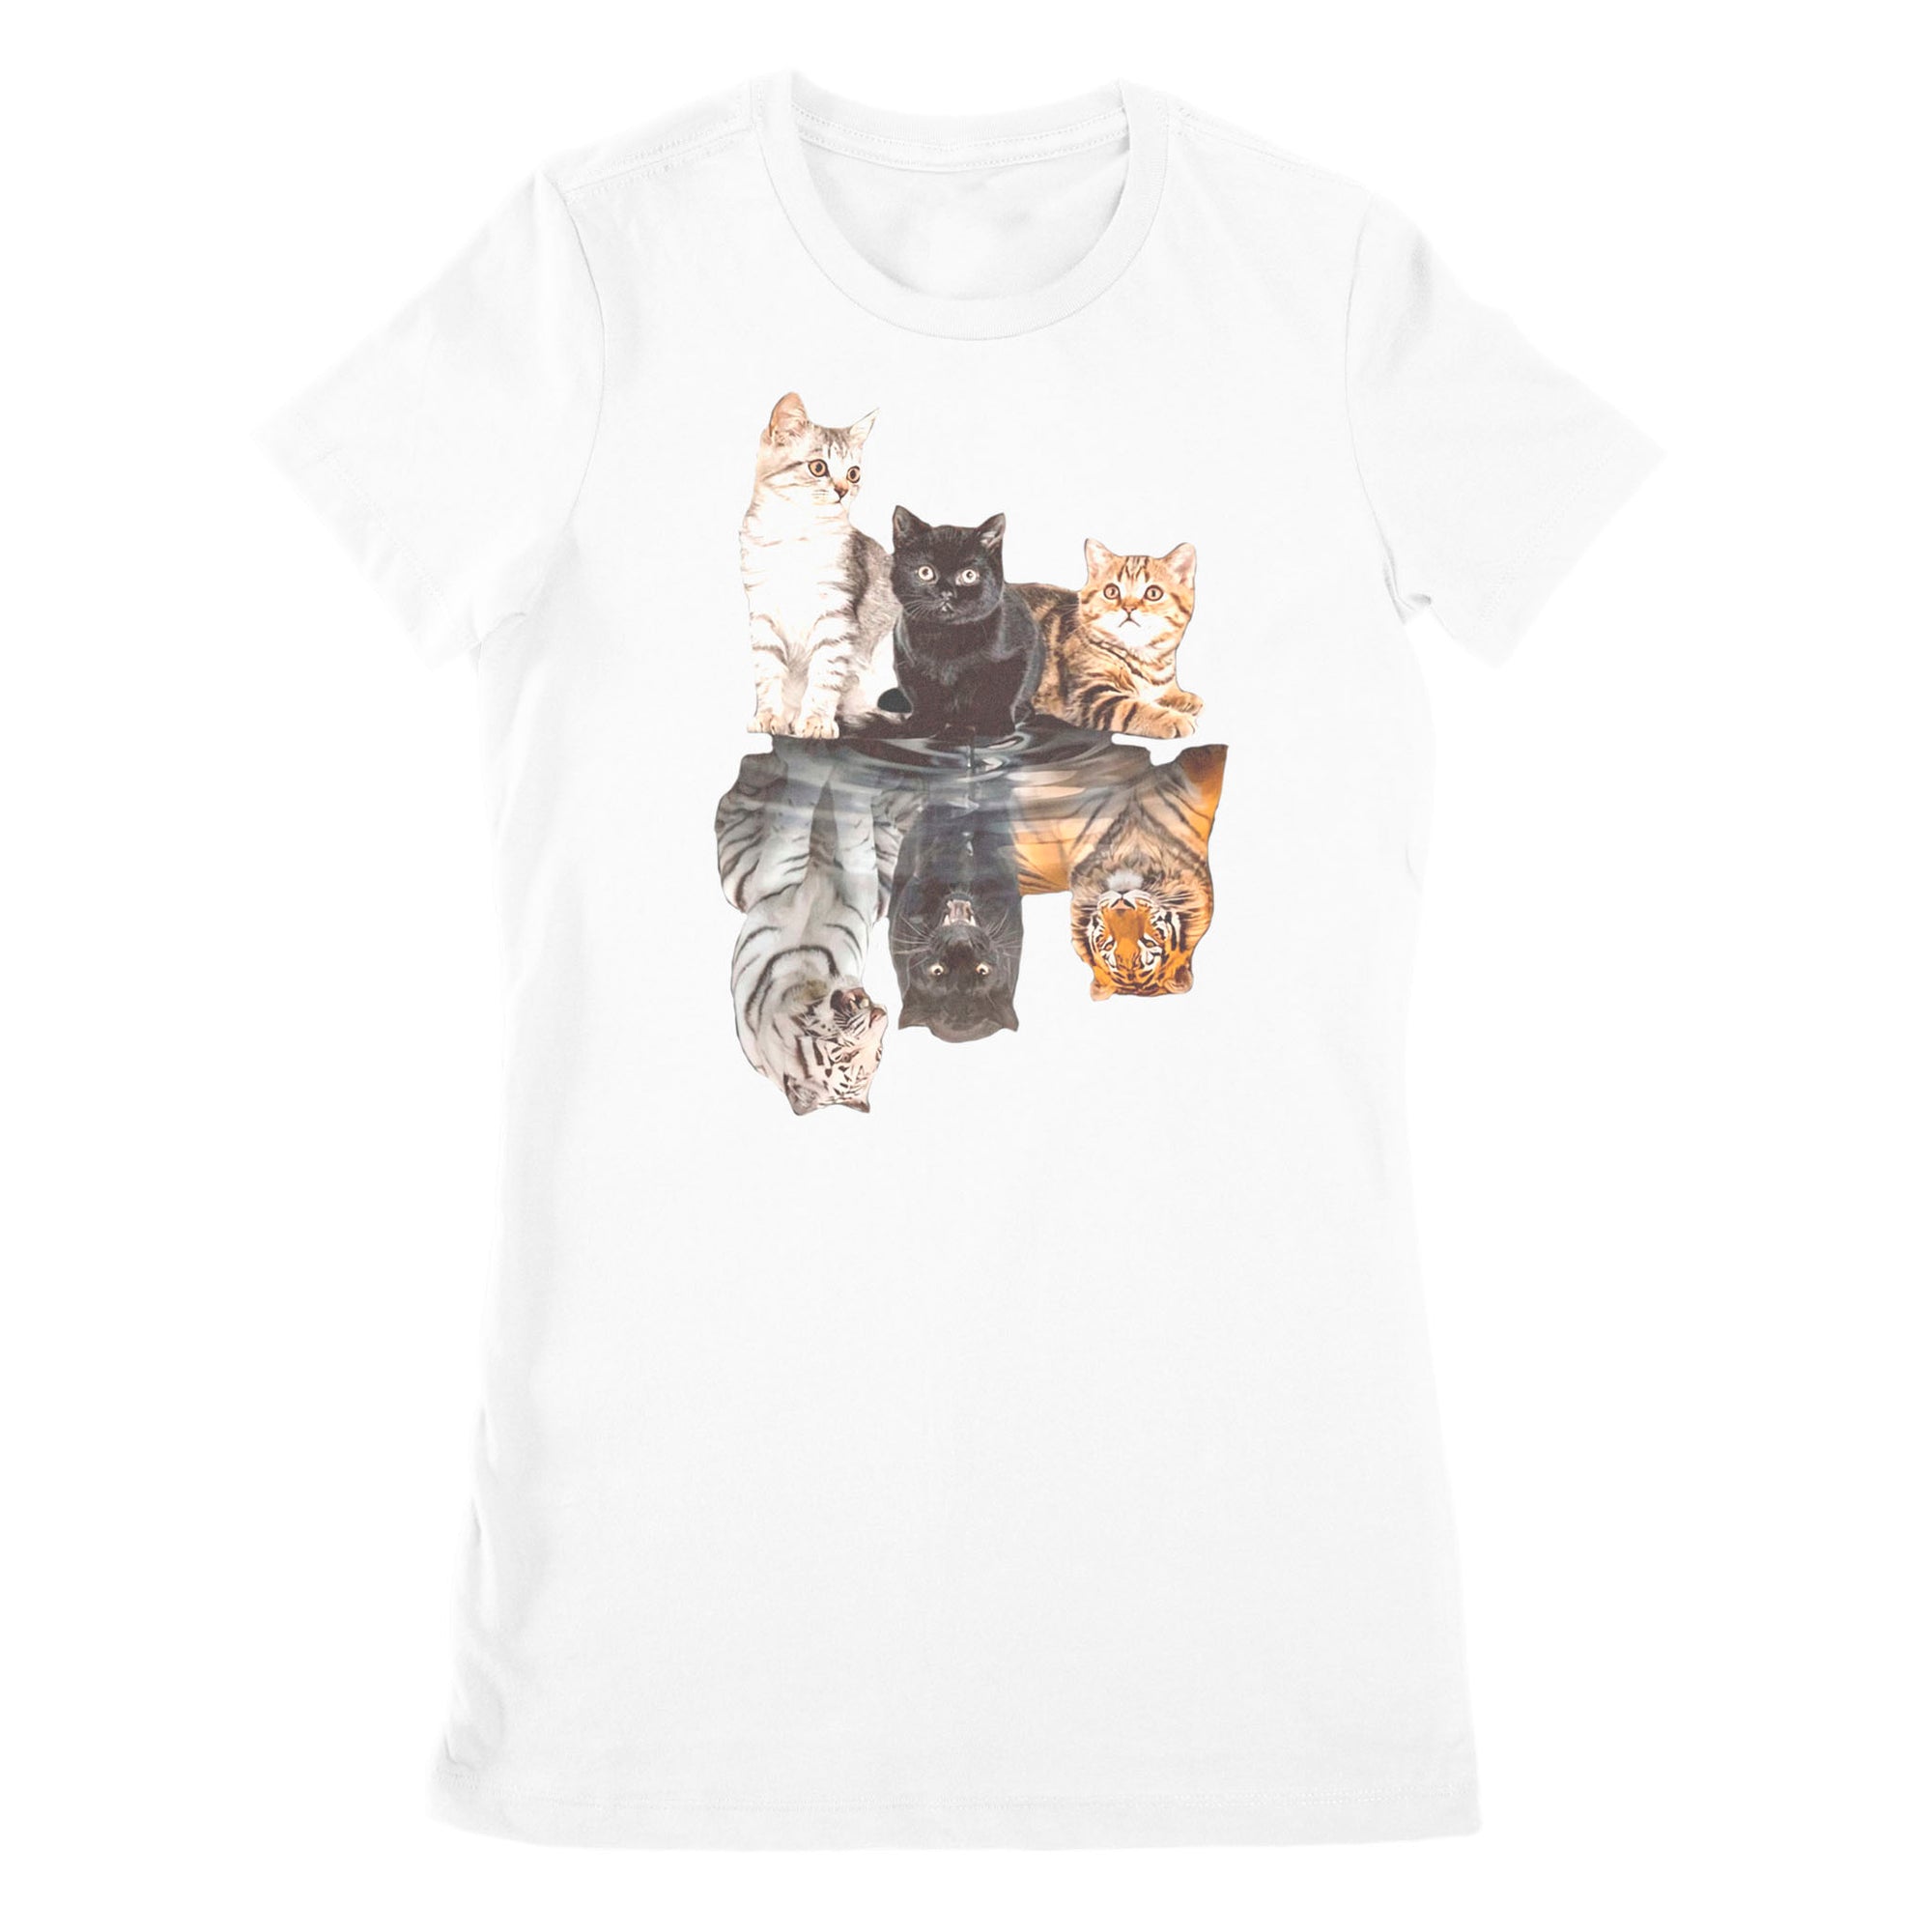 Premium Women's T-shirt - The Cats Water Mirror Reflection Tigers